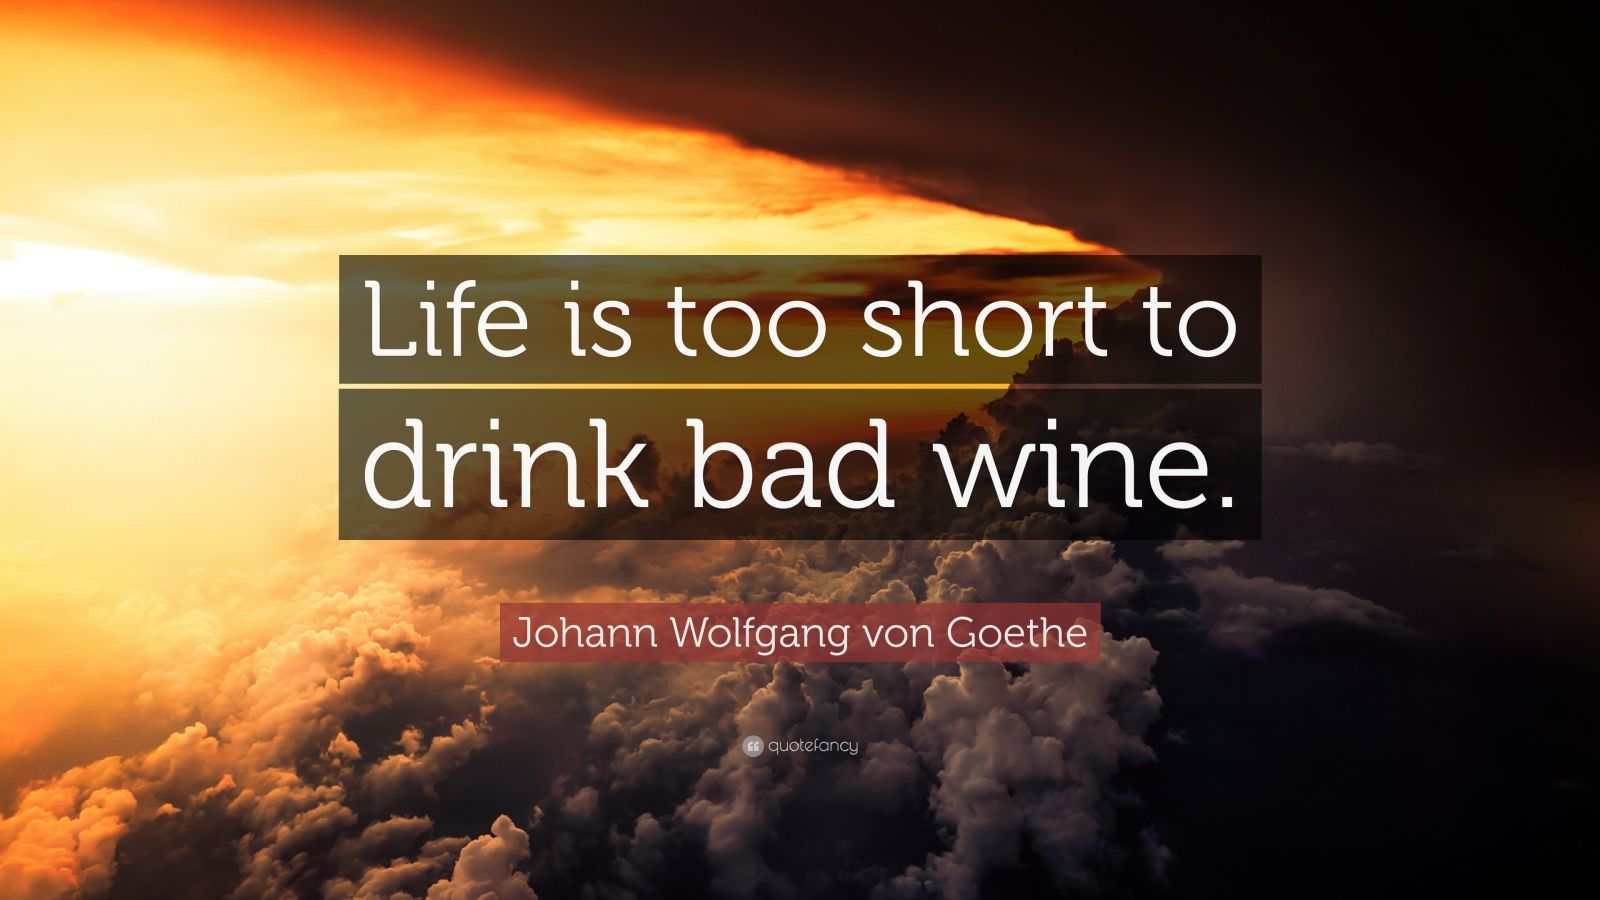 Johann Wolfgang von Goethe Quote: “Life is too short to drink bad wine